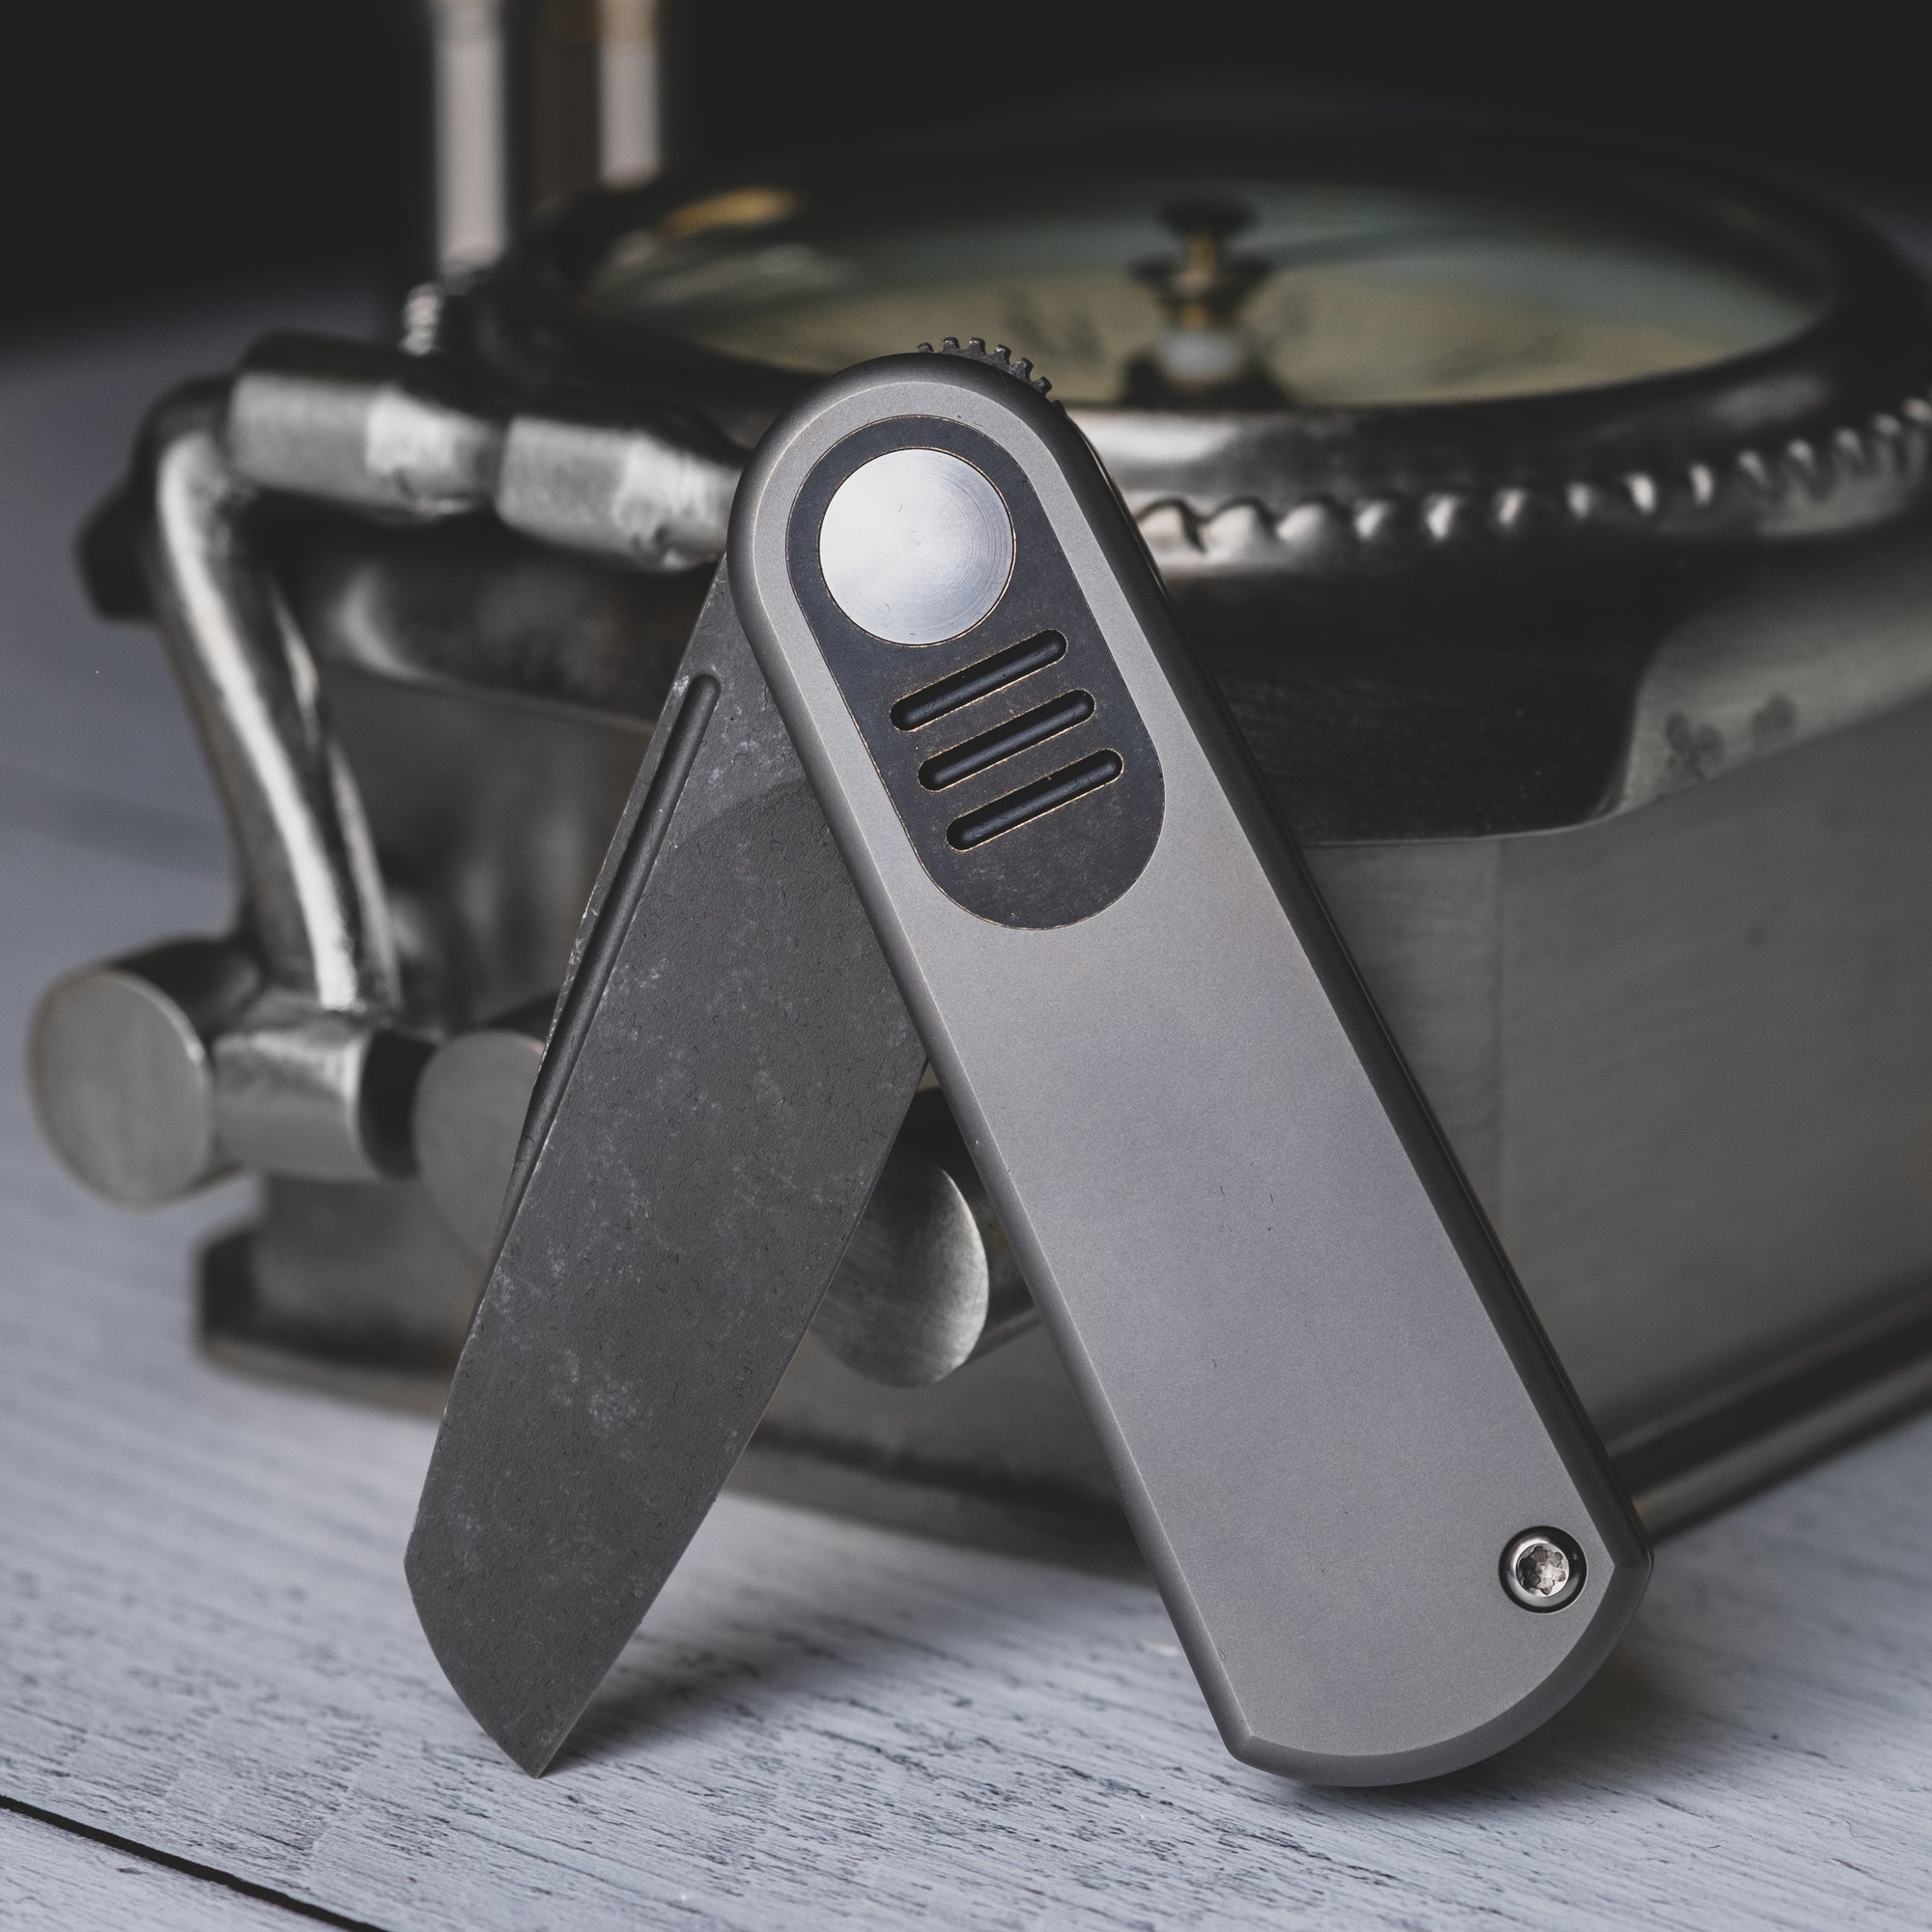 Never-seen-before EDC gadgets you can buy or preorder now » Gadget